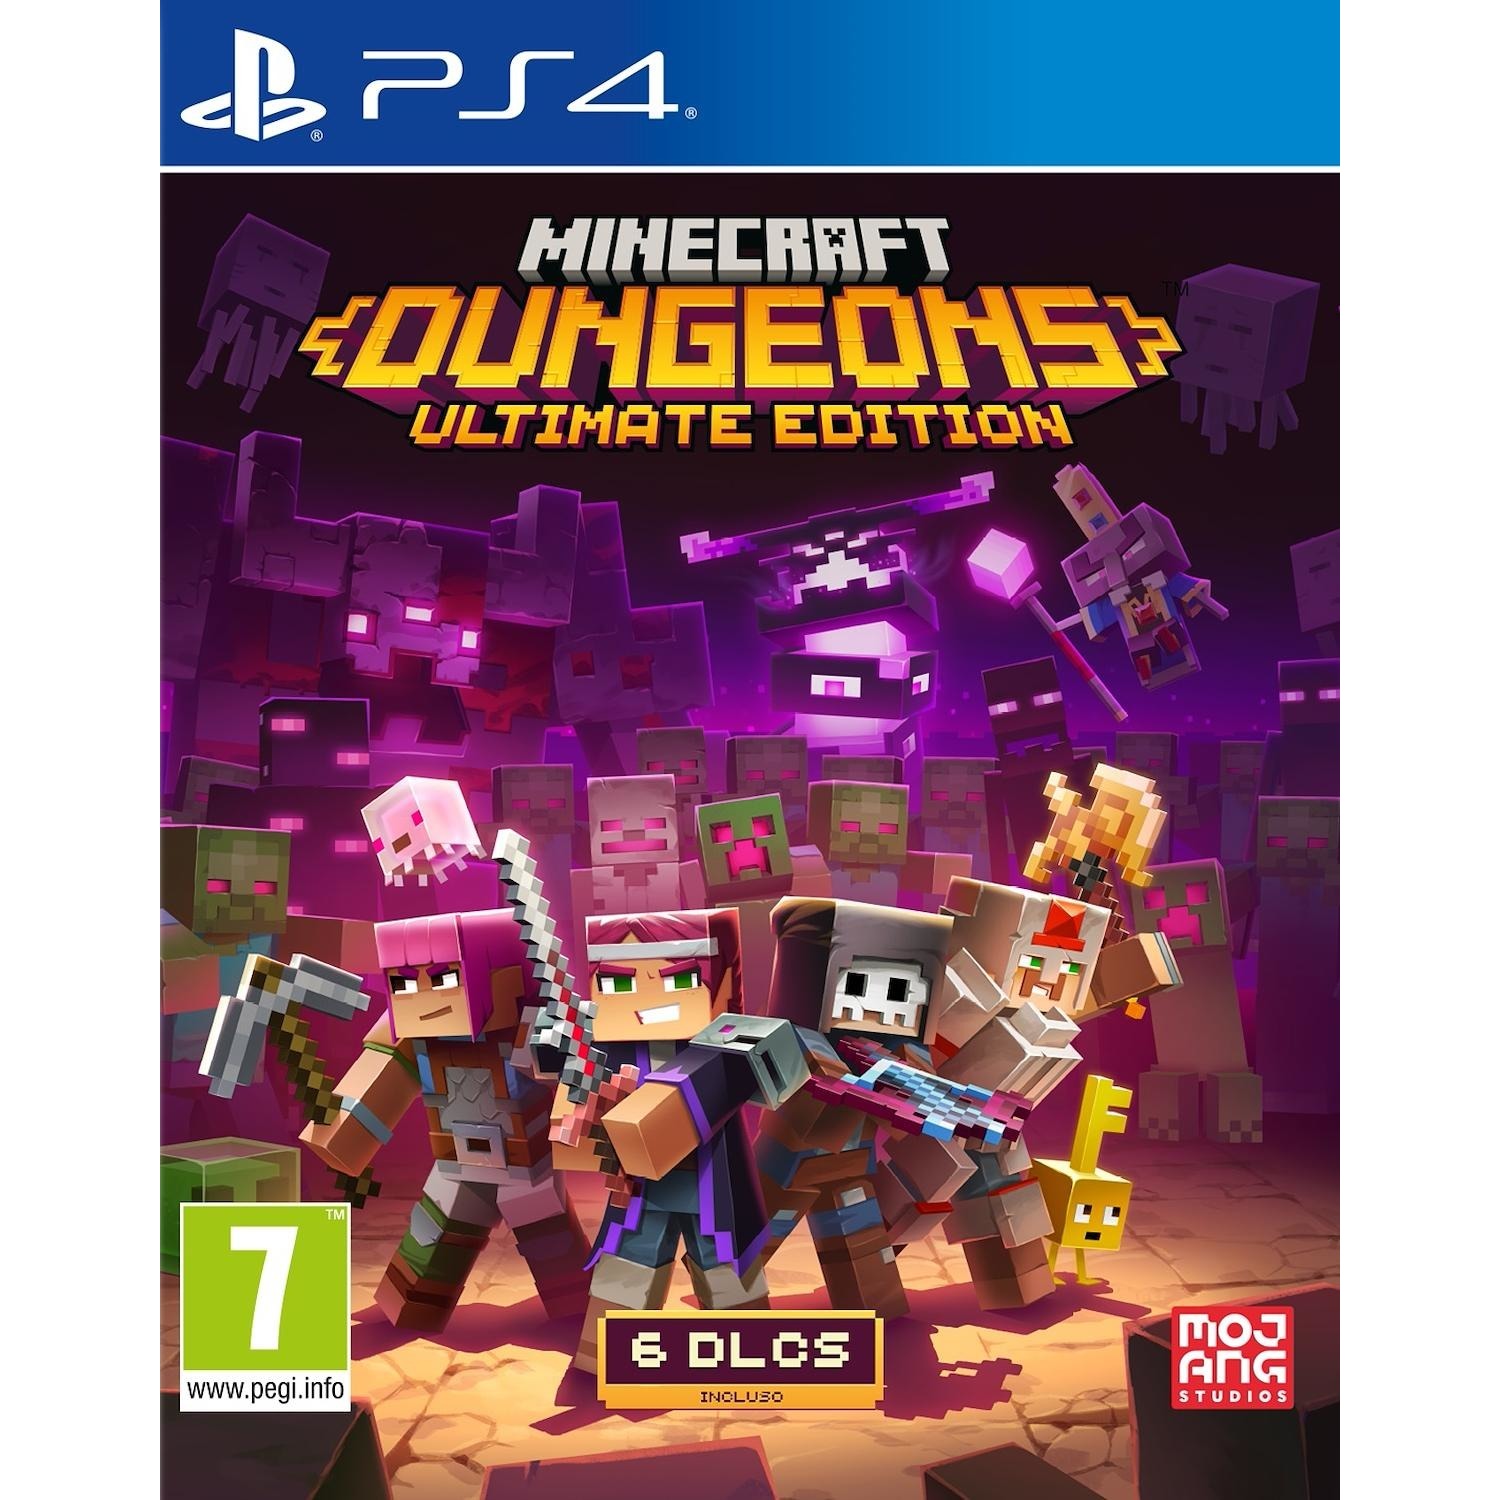 Gioco PS4 Minecraft Dungeons Ultimate Edition - DIMOStore